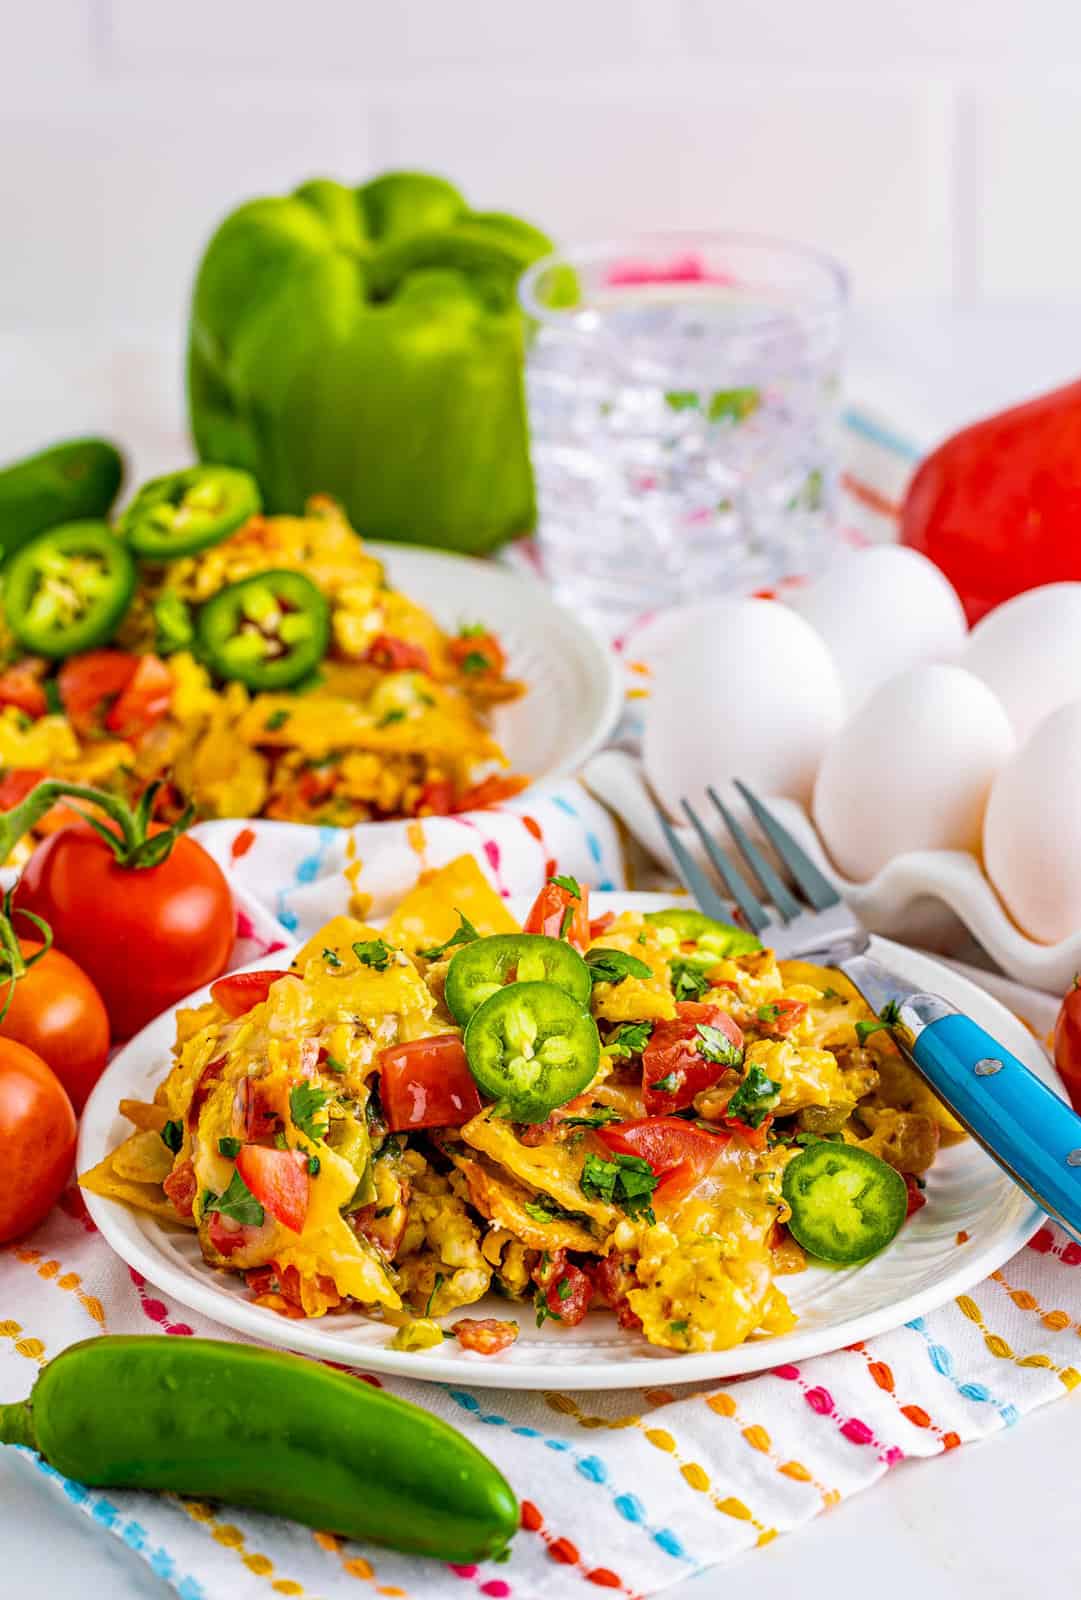 Migas Recipe on two plates with eggs and ingredients in background.